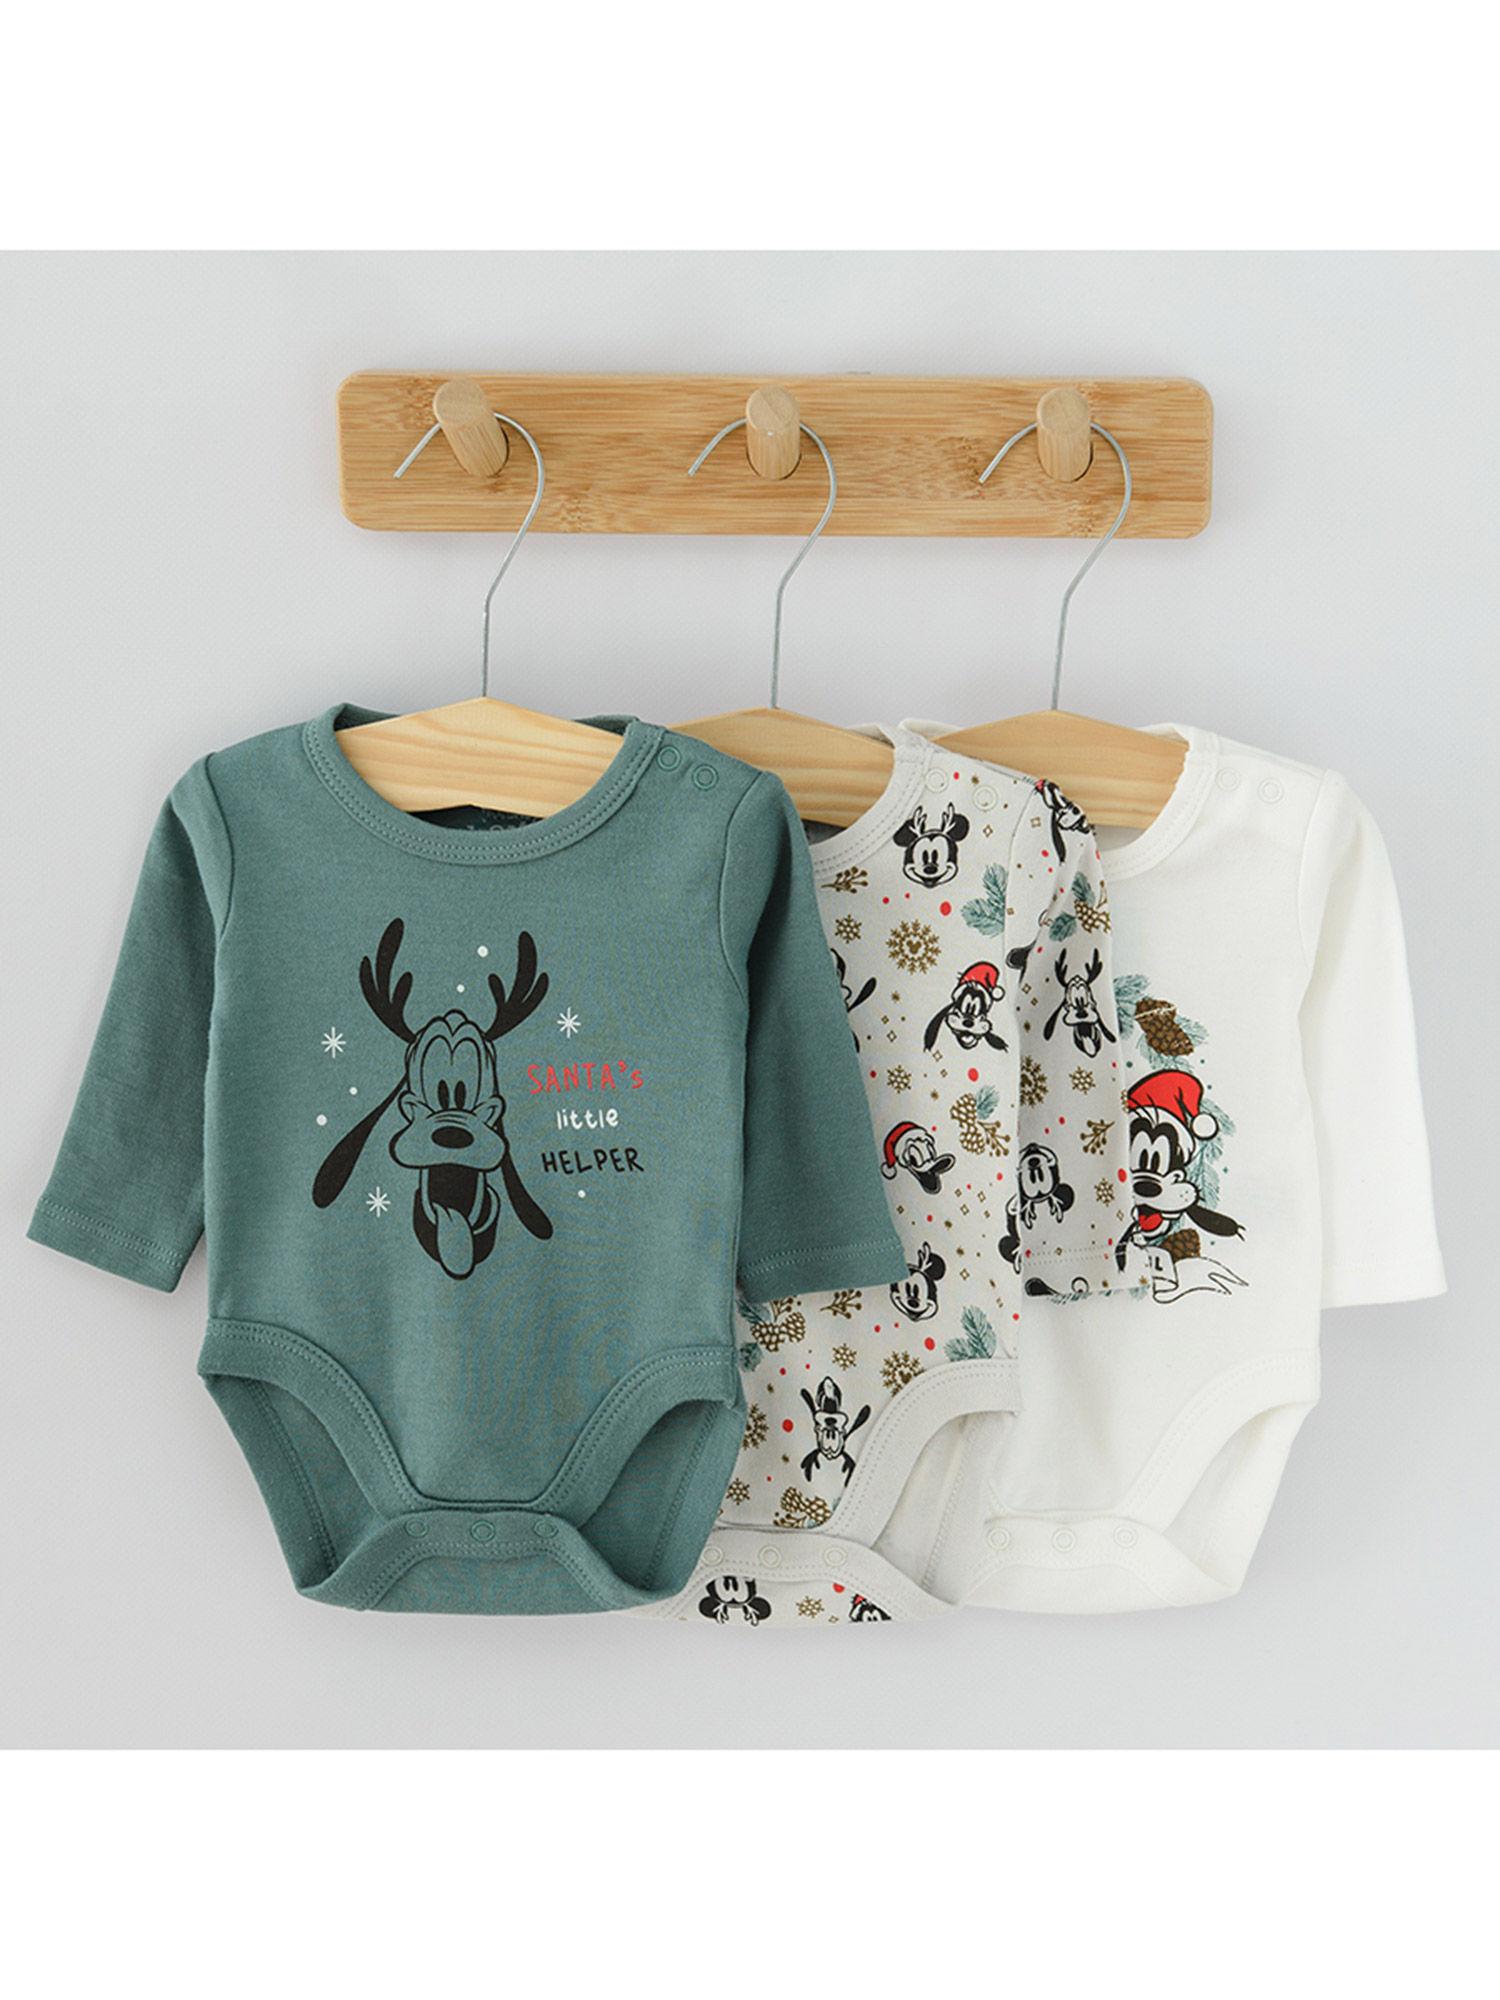 smyk-boy-multi-color-knitted-bodysuits-(pack-of-3)